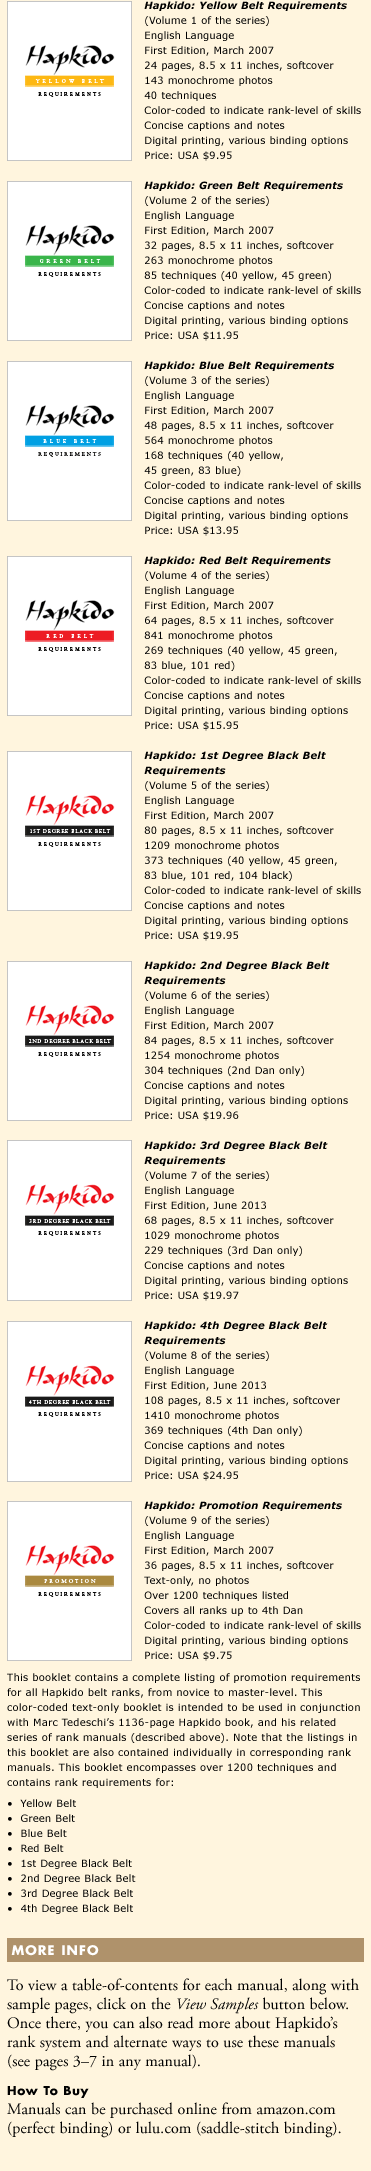 Description and specs for nine-volume series of Hapkido Manuals by Marc Tedeschi